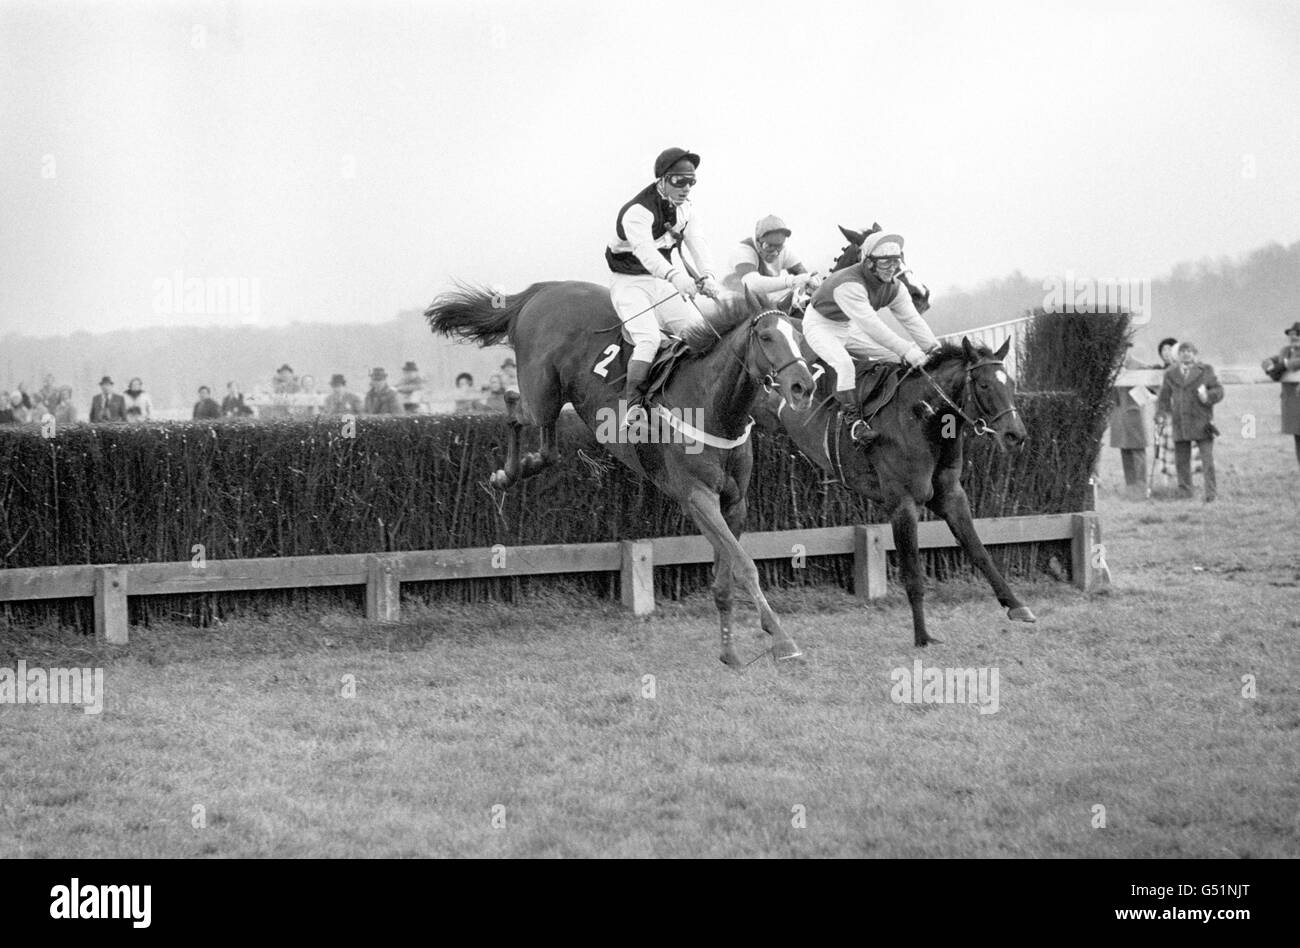 Fort Devon (2) with Bill Smith in the saddle and Bachelor's Hall, Martin O'Halloran up, take the last fence together before Bachelor's Hall went on to win the race. Stock Photo